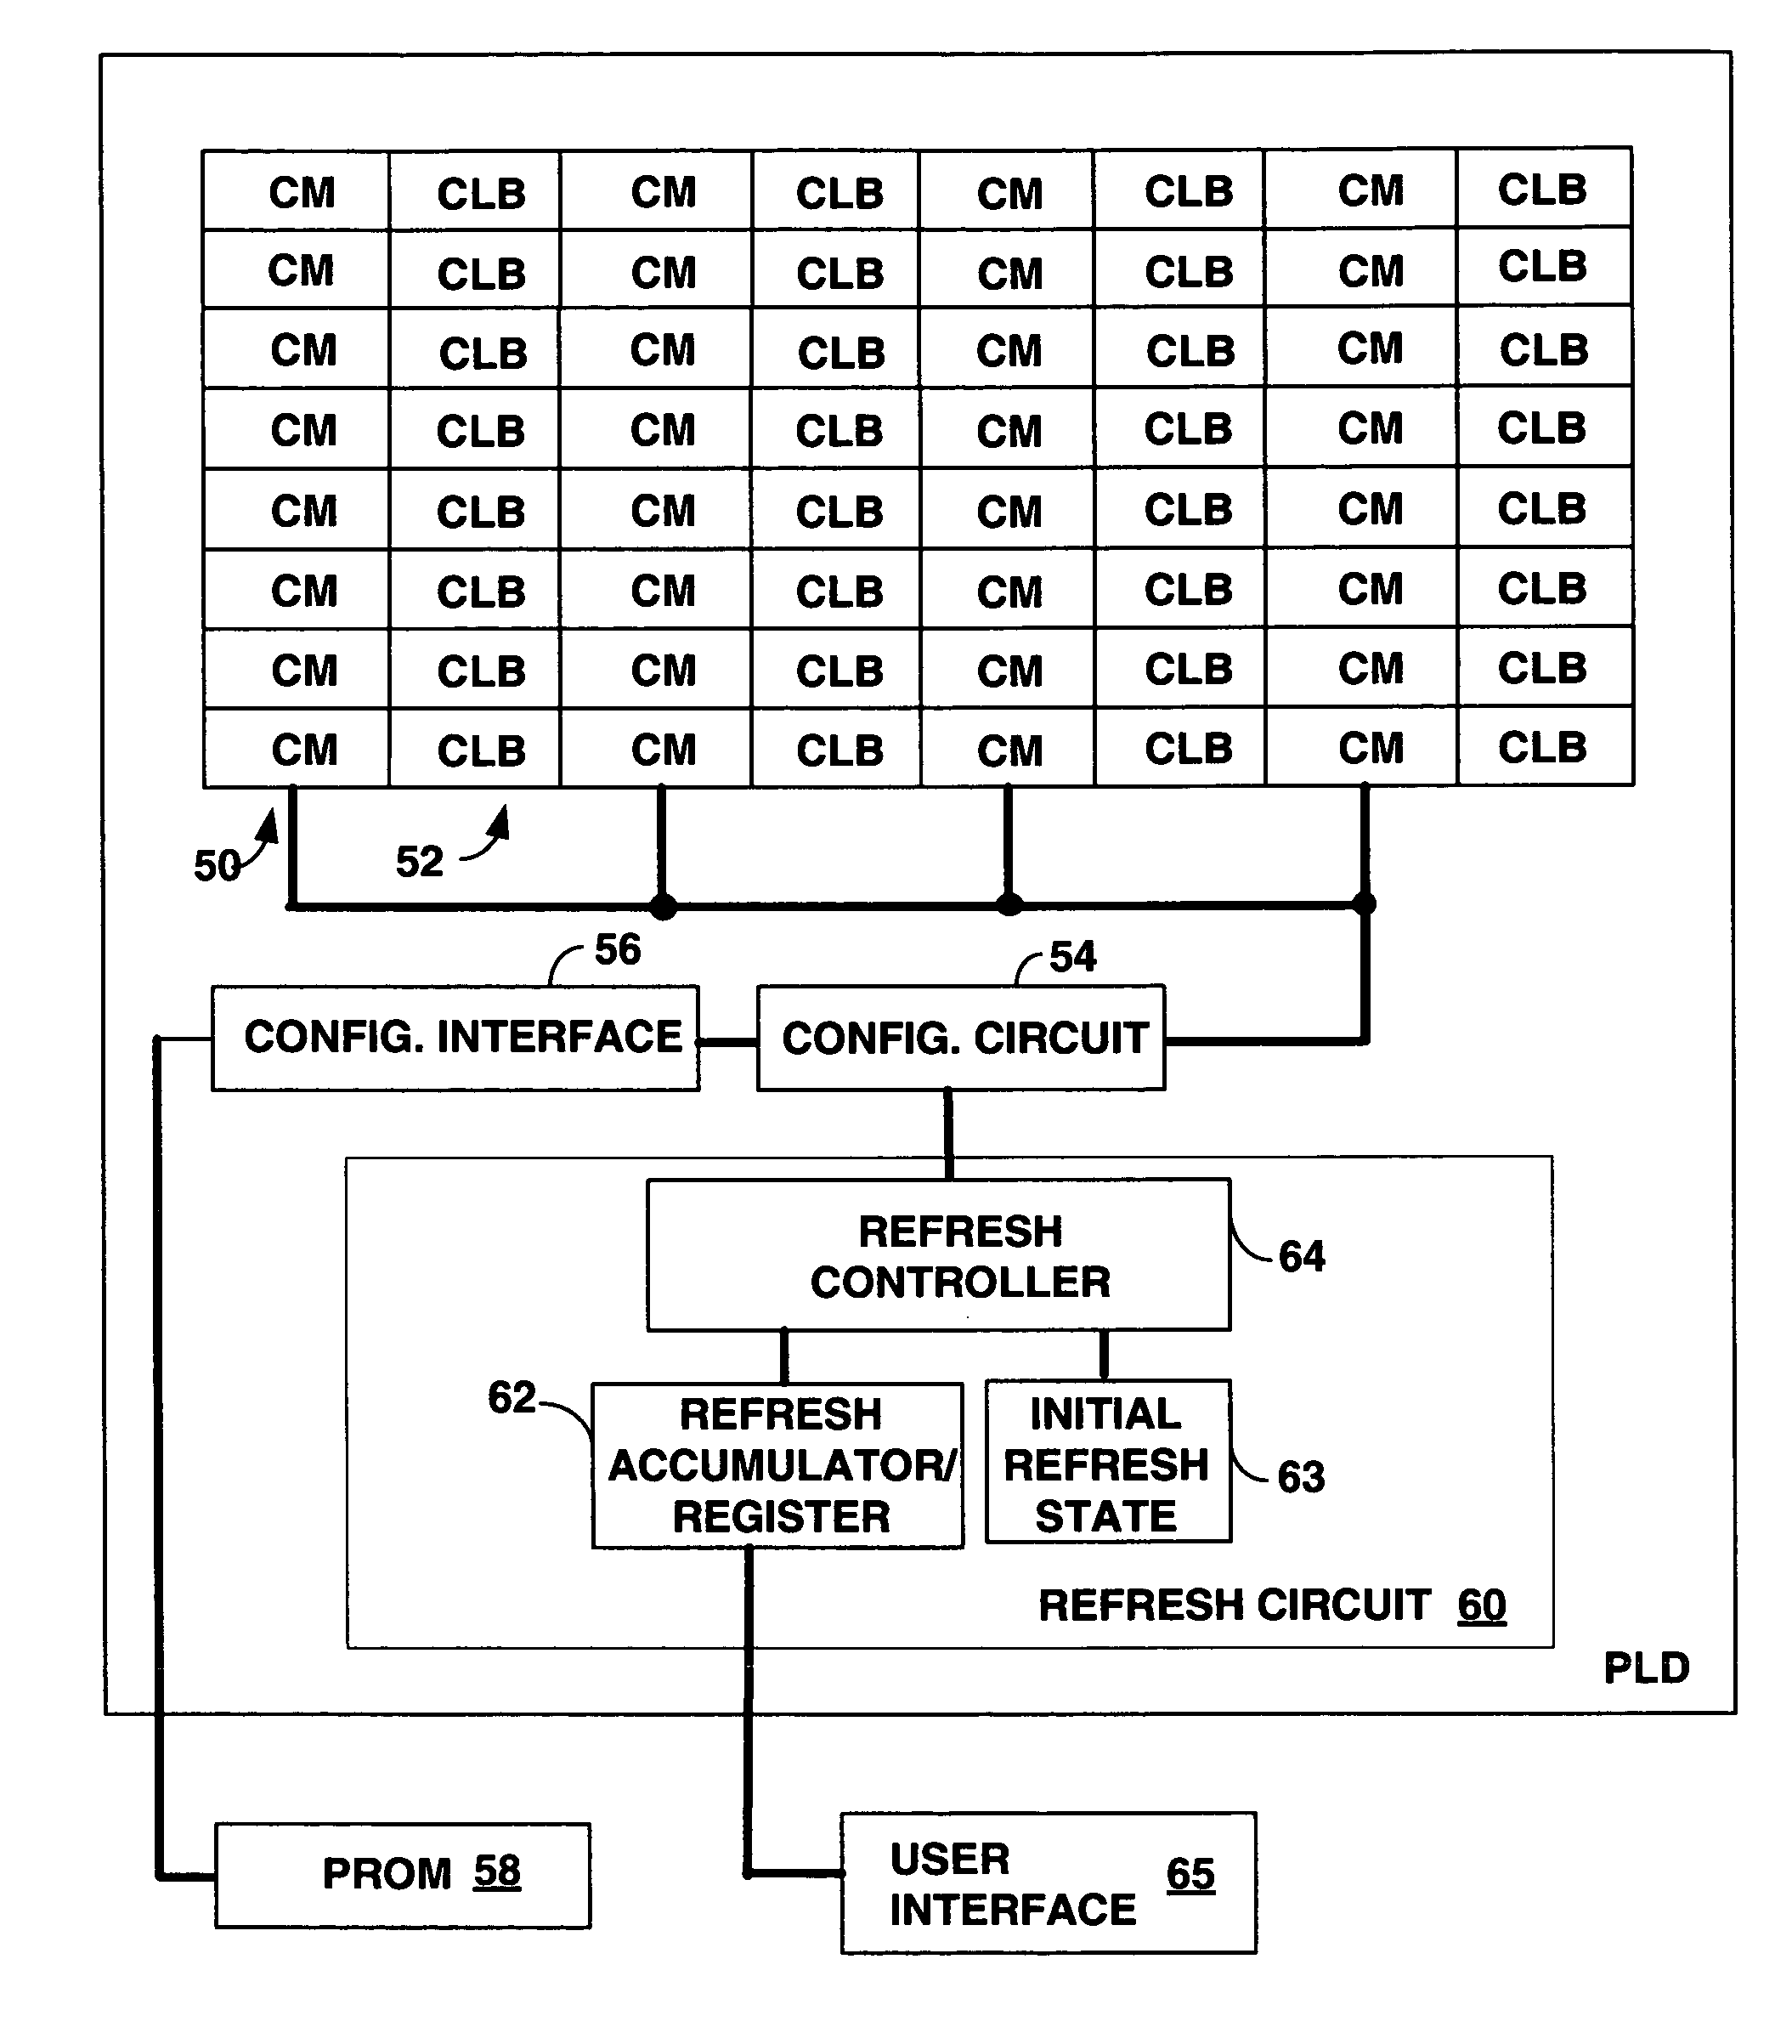 Programmable logic device (PLD) with memory refresh based on single event upset (SEU) occurrence to maintain soft error immunity